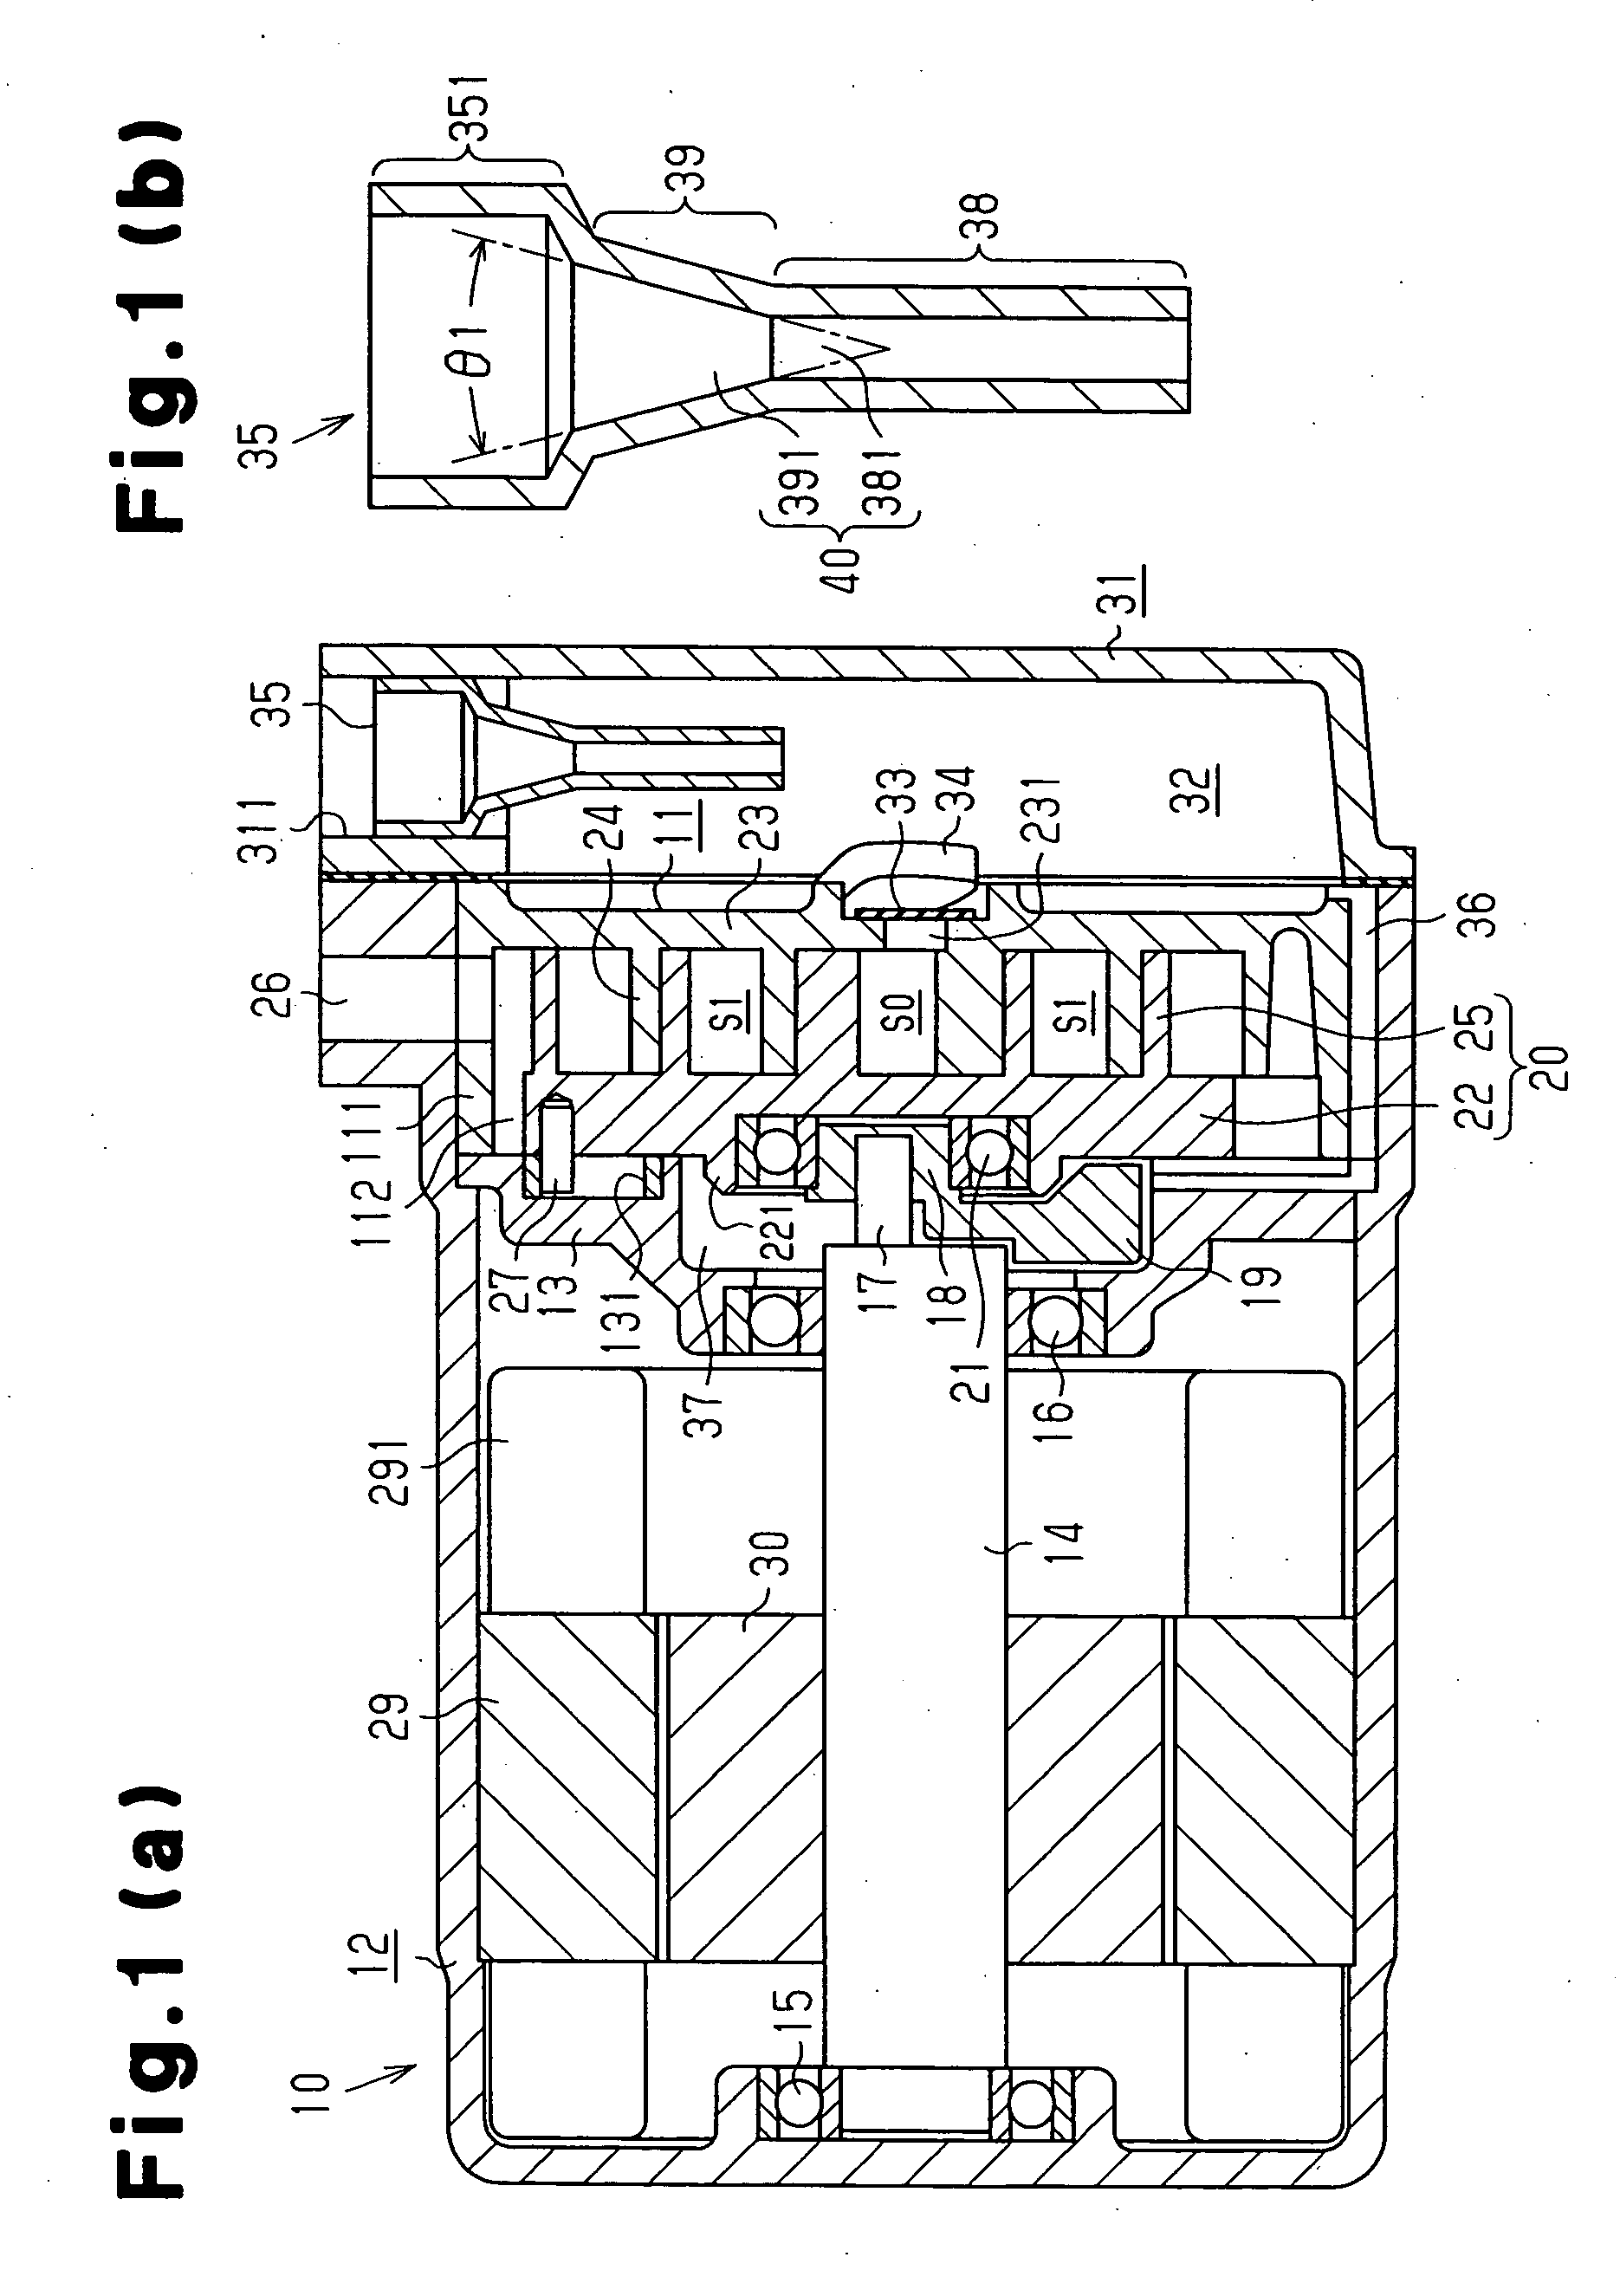 Device having a pulsation reducing structure, a passage forming body and compressor